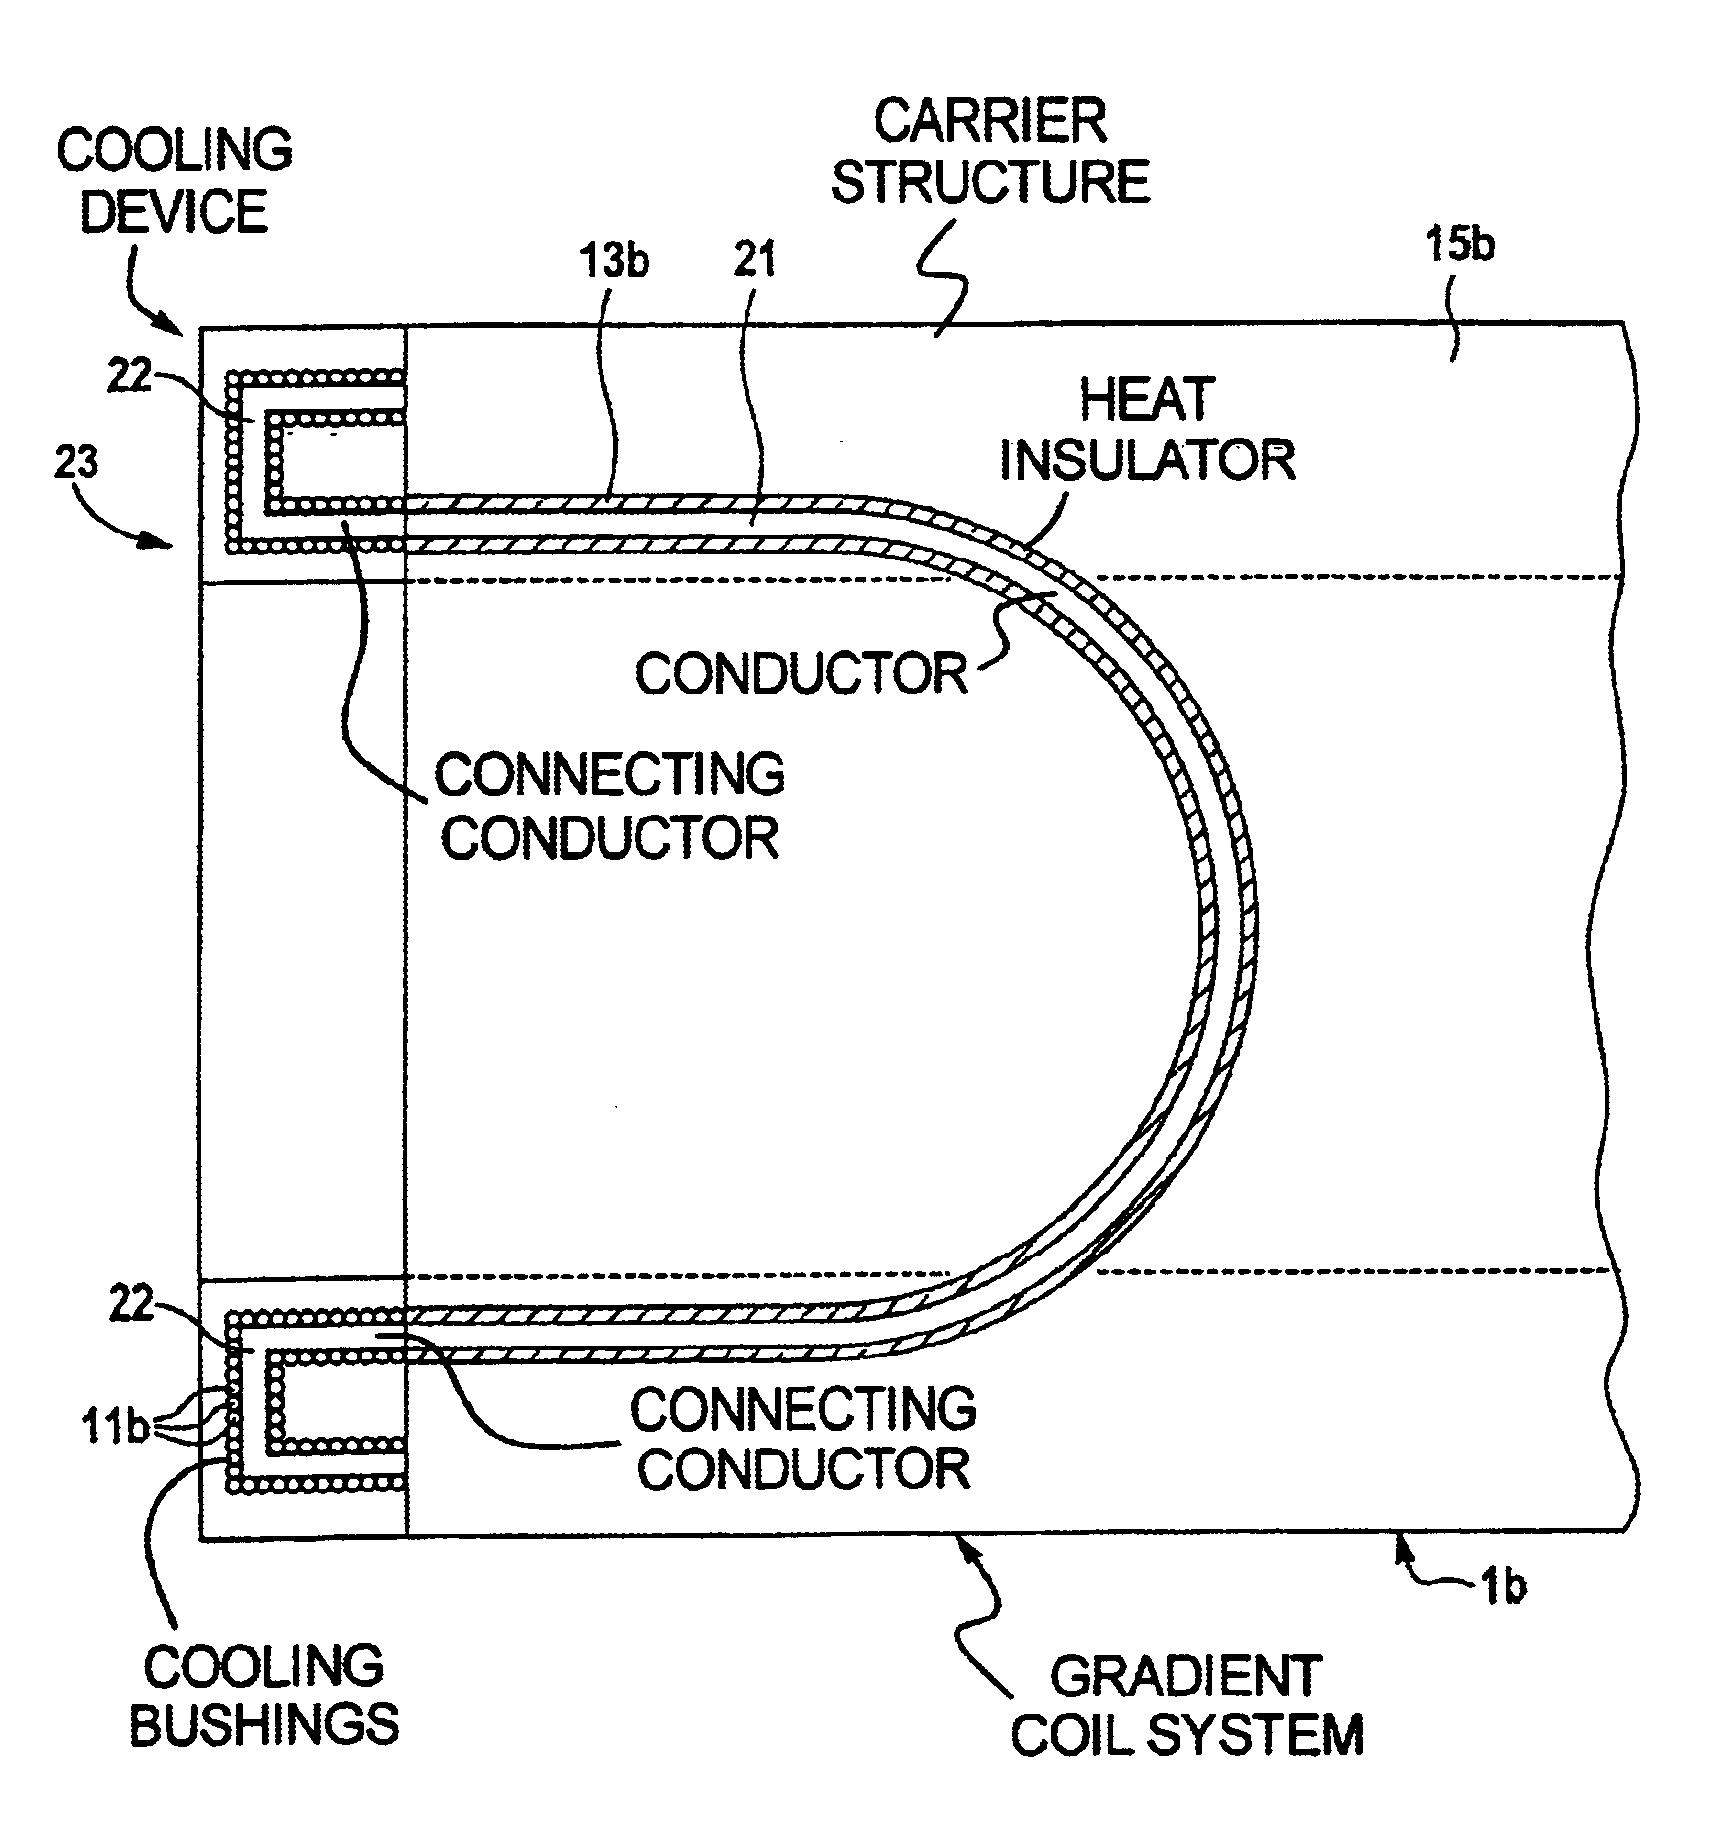 Magnetic resonance gradient coil with a heat insulator disposed between the electrical conductor and the carrier structure